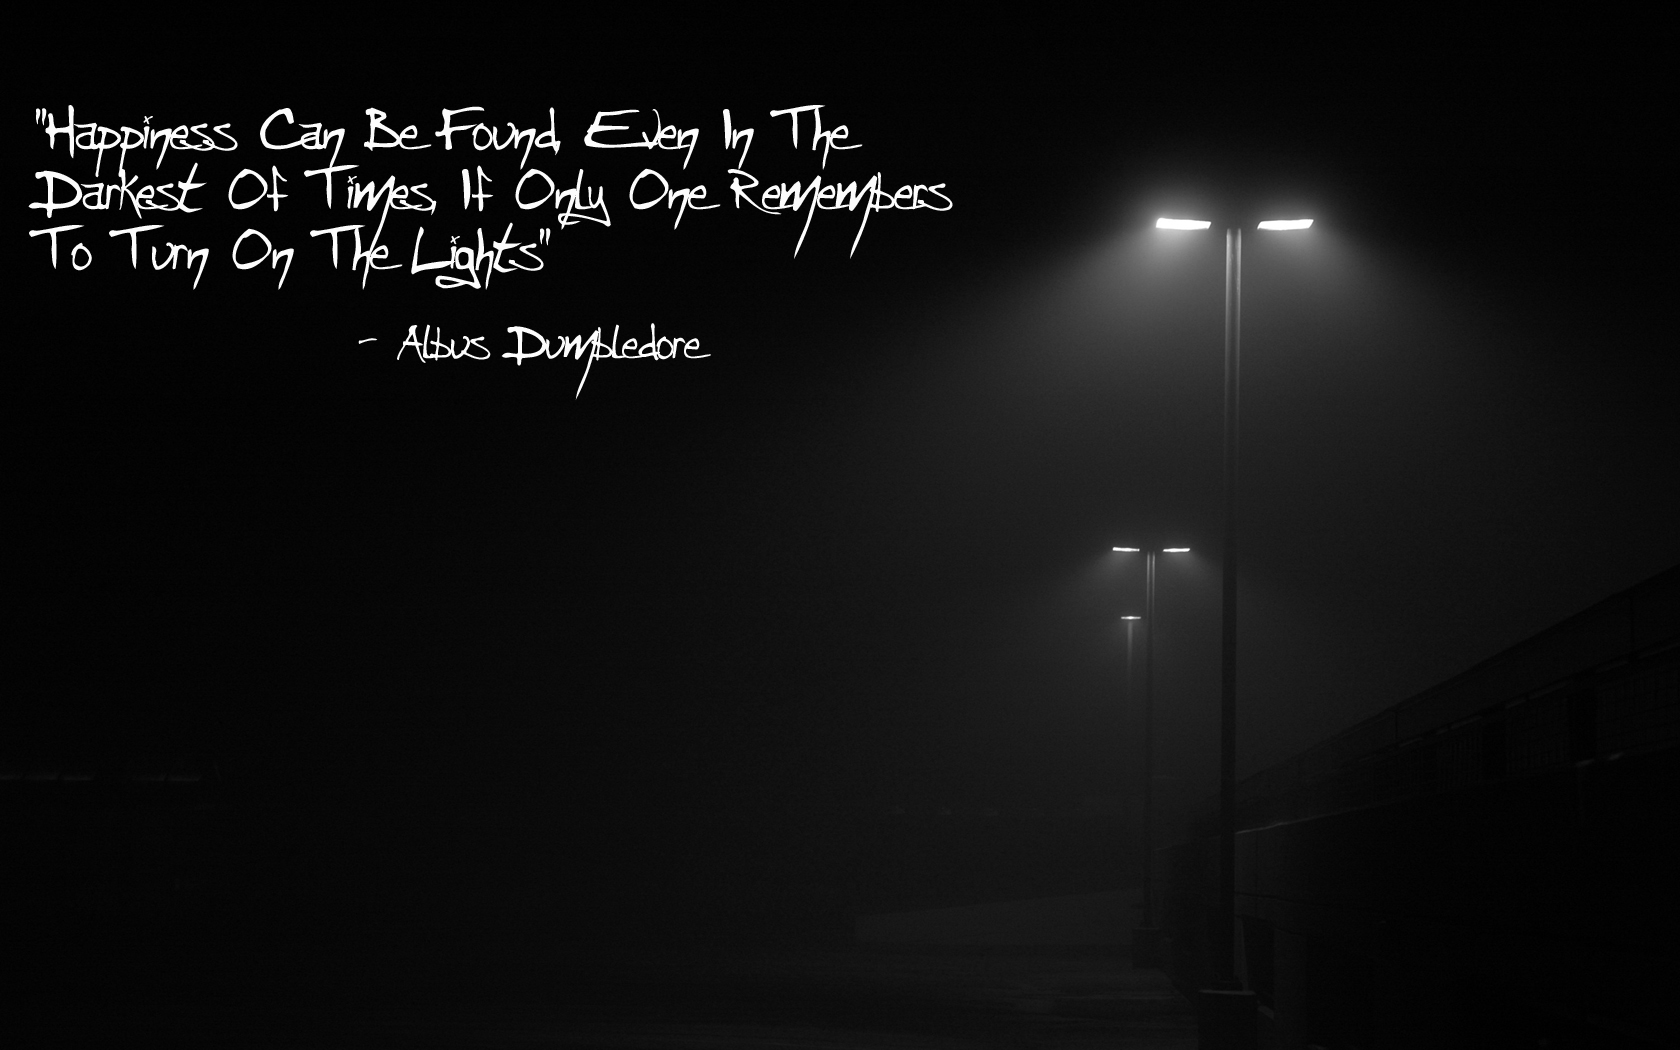 Harry Potter Quotes Wallpaper For Android For Free - Street Light -  1680x1050 Wallpaper 